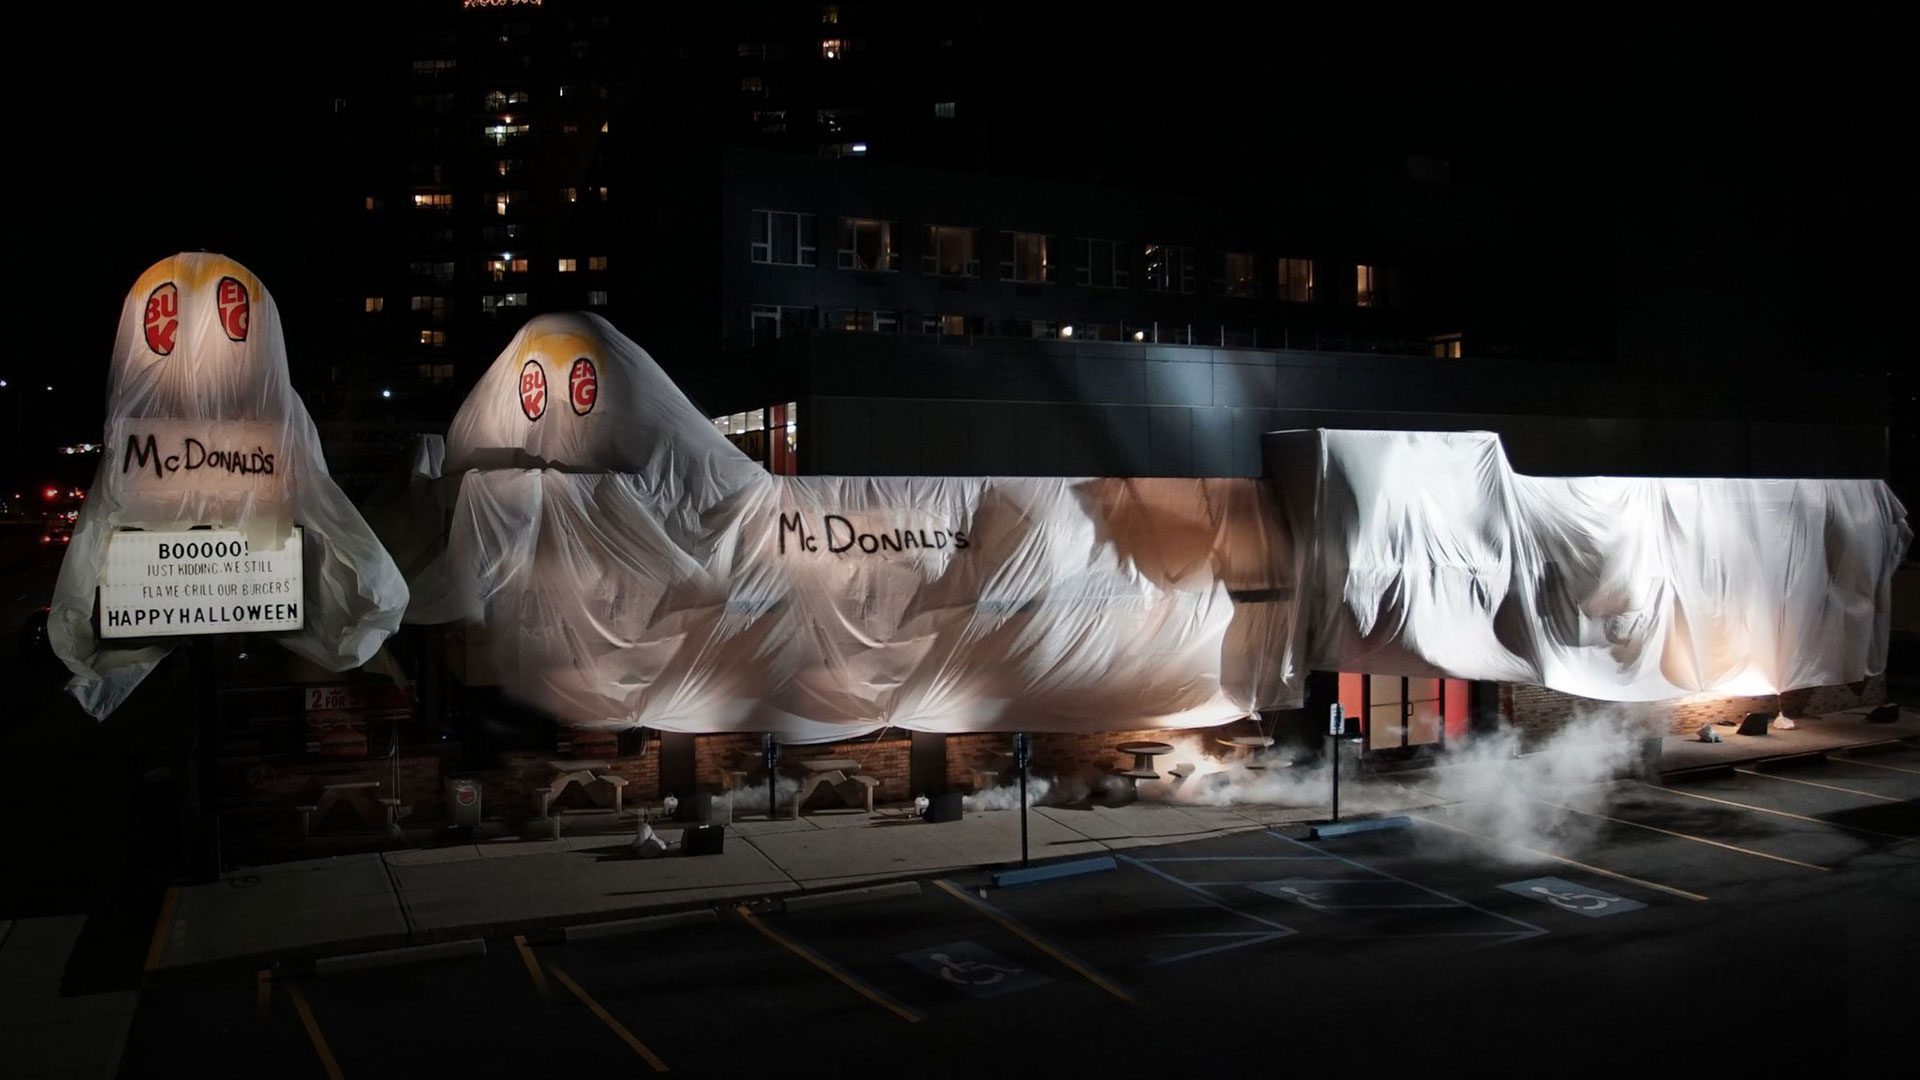 Burger King Dressed Up as the Ghost of McDonald's in This Scary Good